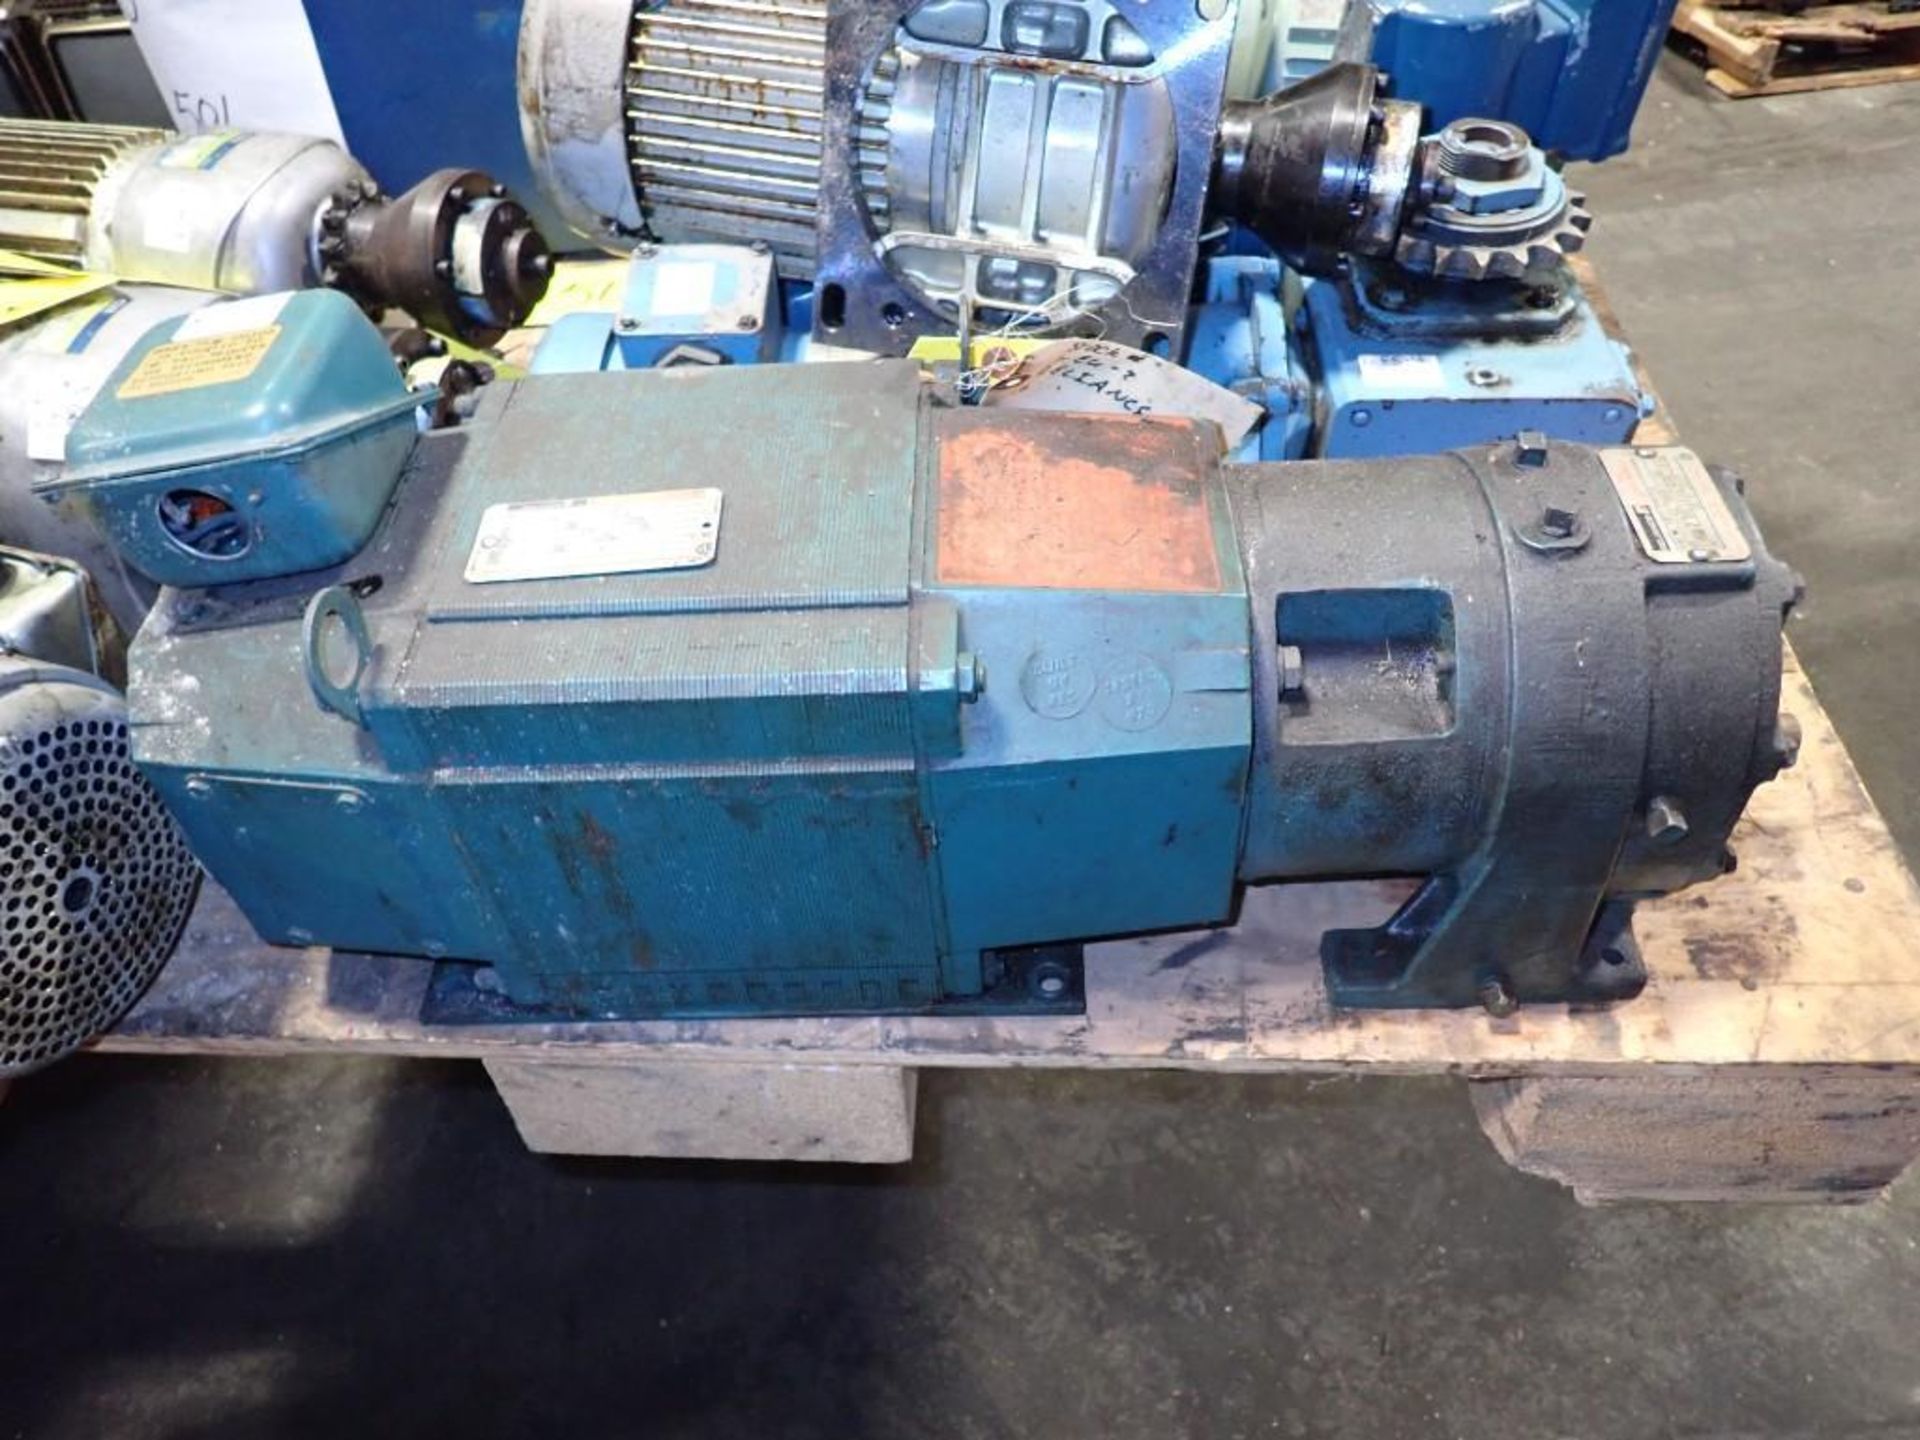 Reliance Electric Motor w/ Speed Reducer